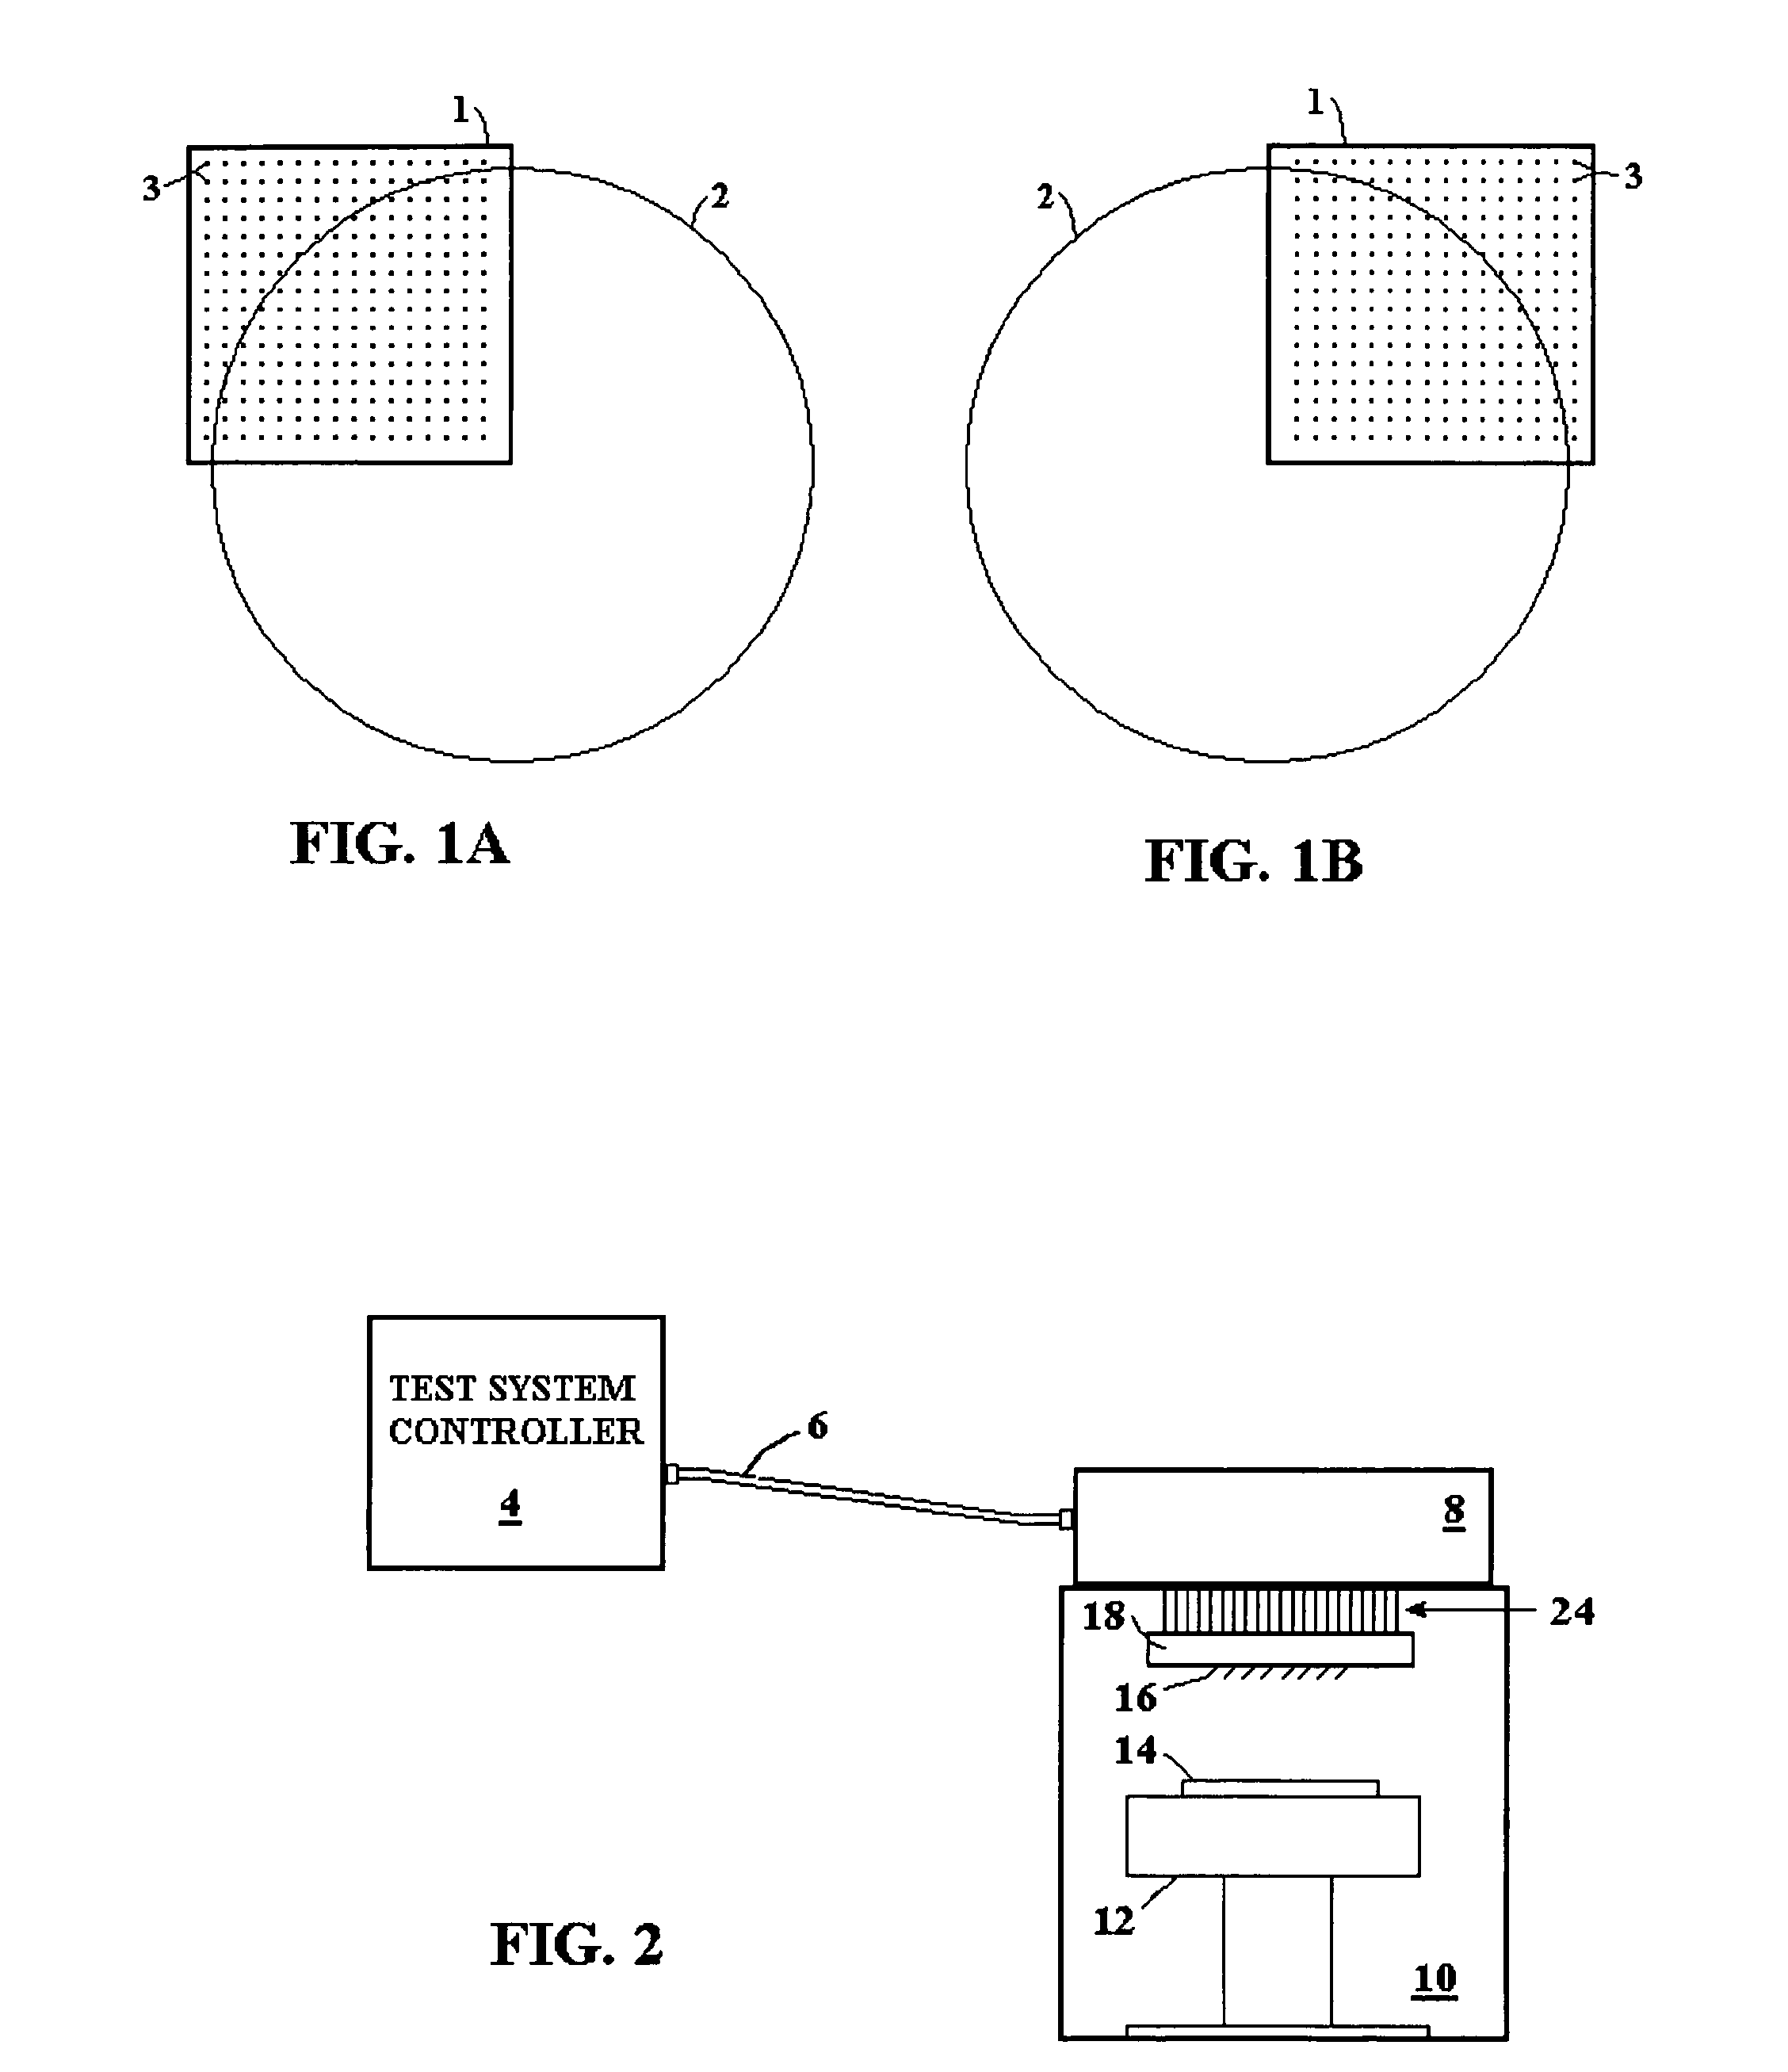 Probe card assembly including a programmable device to selectively route signals from channels of a test system controller to probes